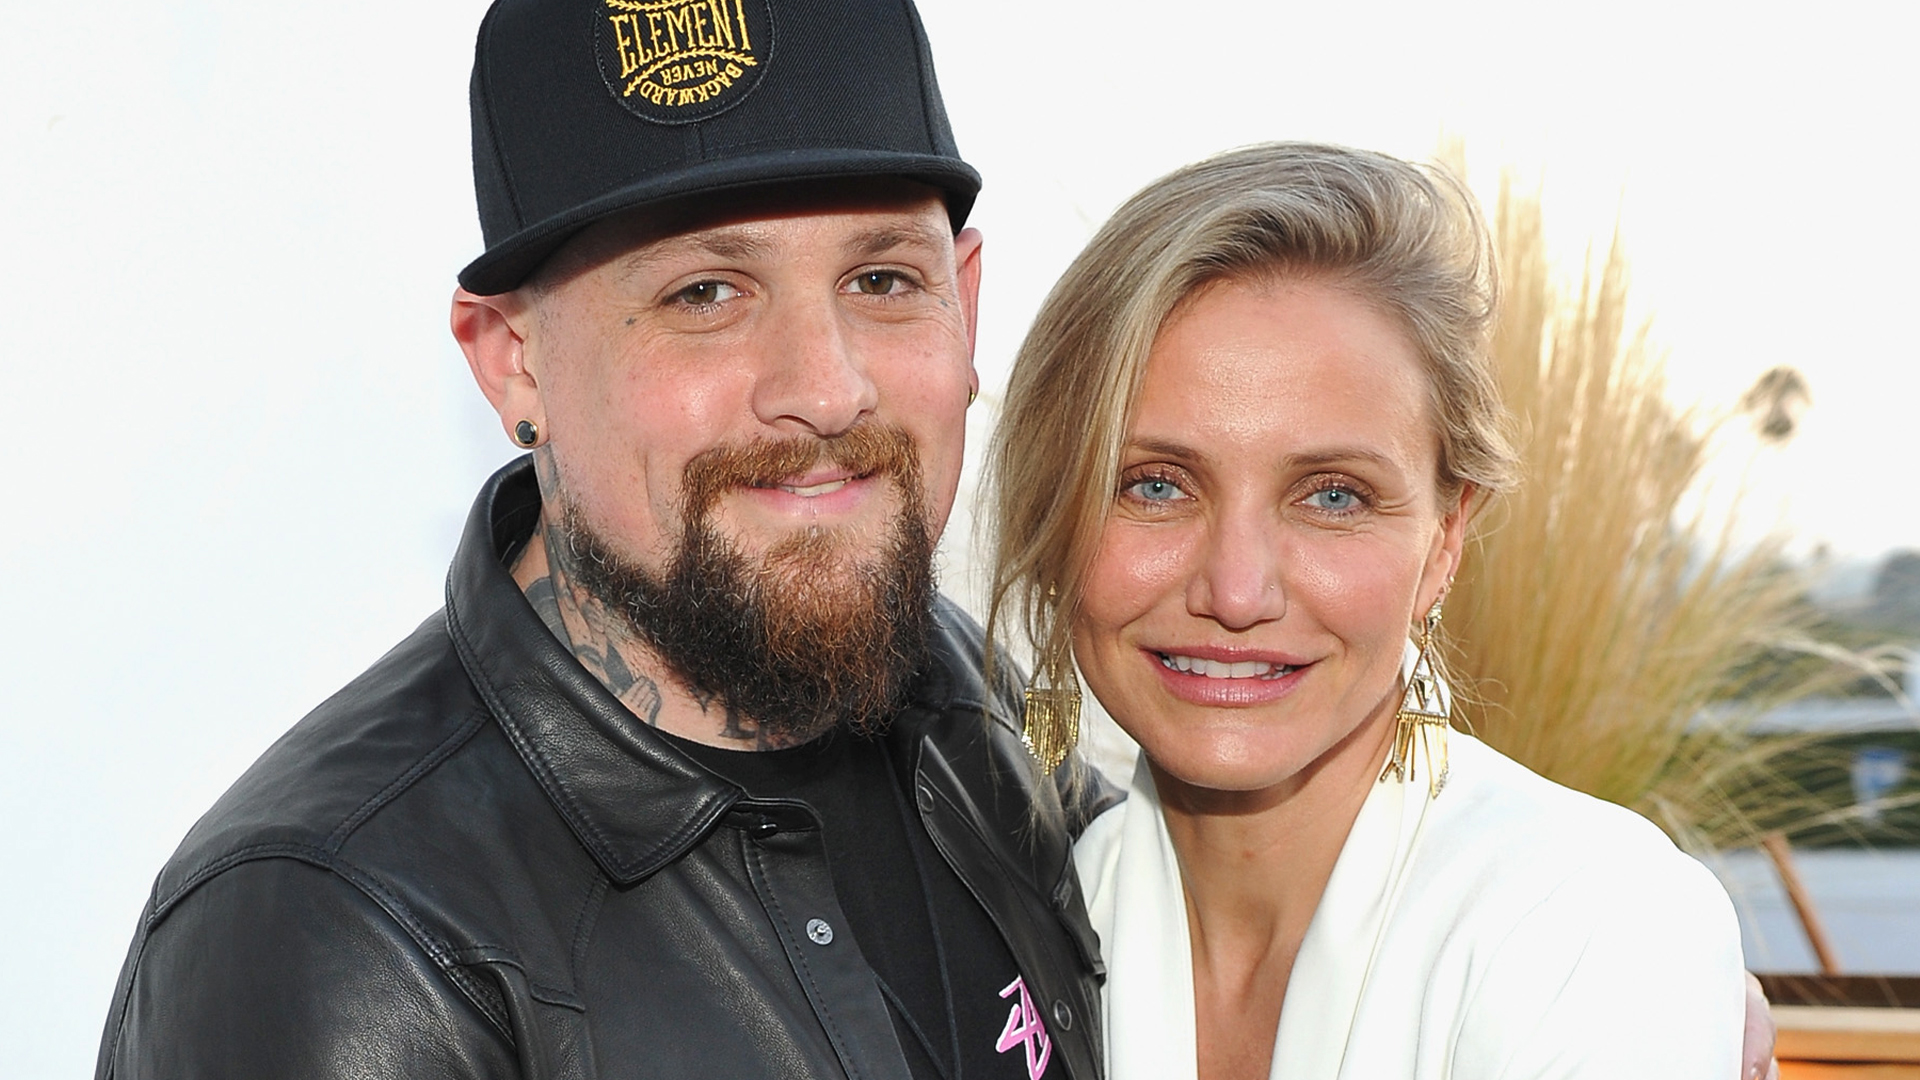 Surprising Celebrity Couples Defying the Odds: From Cameron Diaz and Benji Madden to Bill Hader and Ali Wong